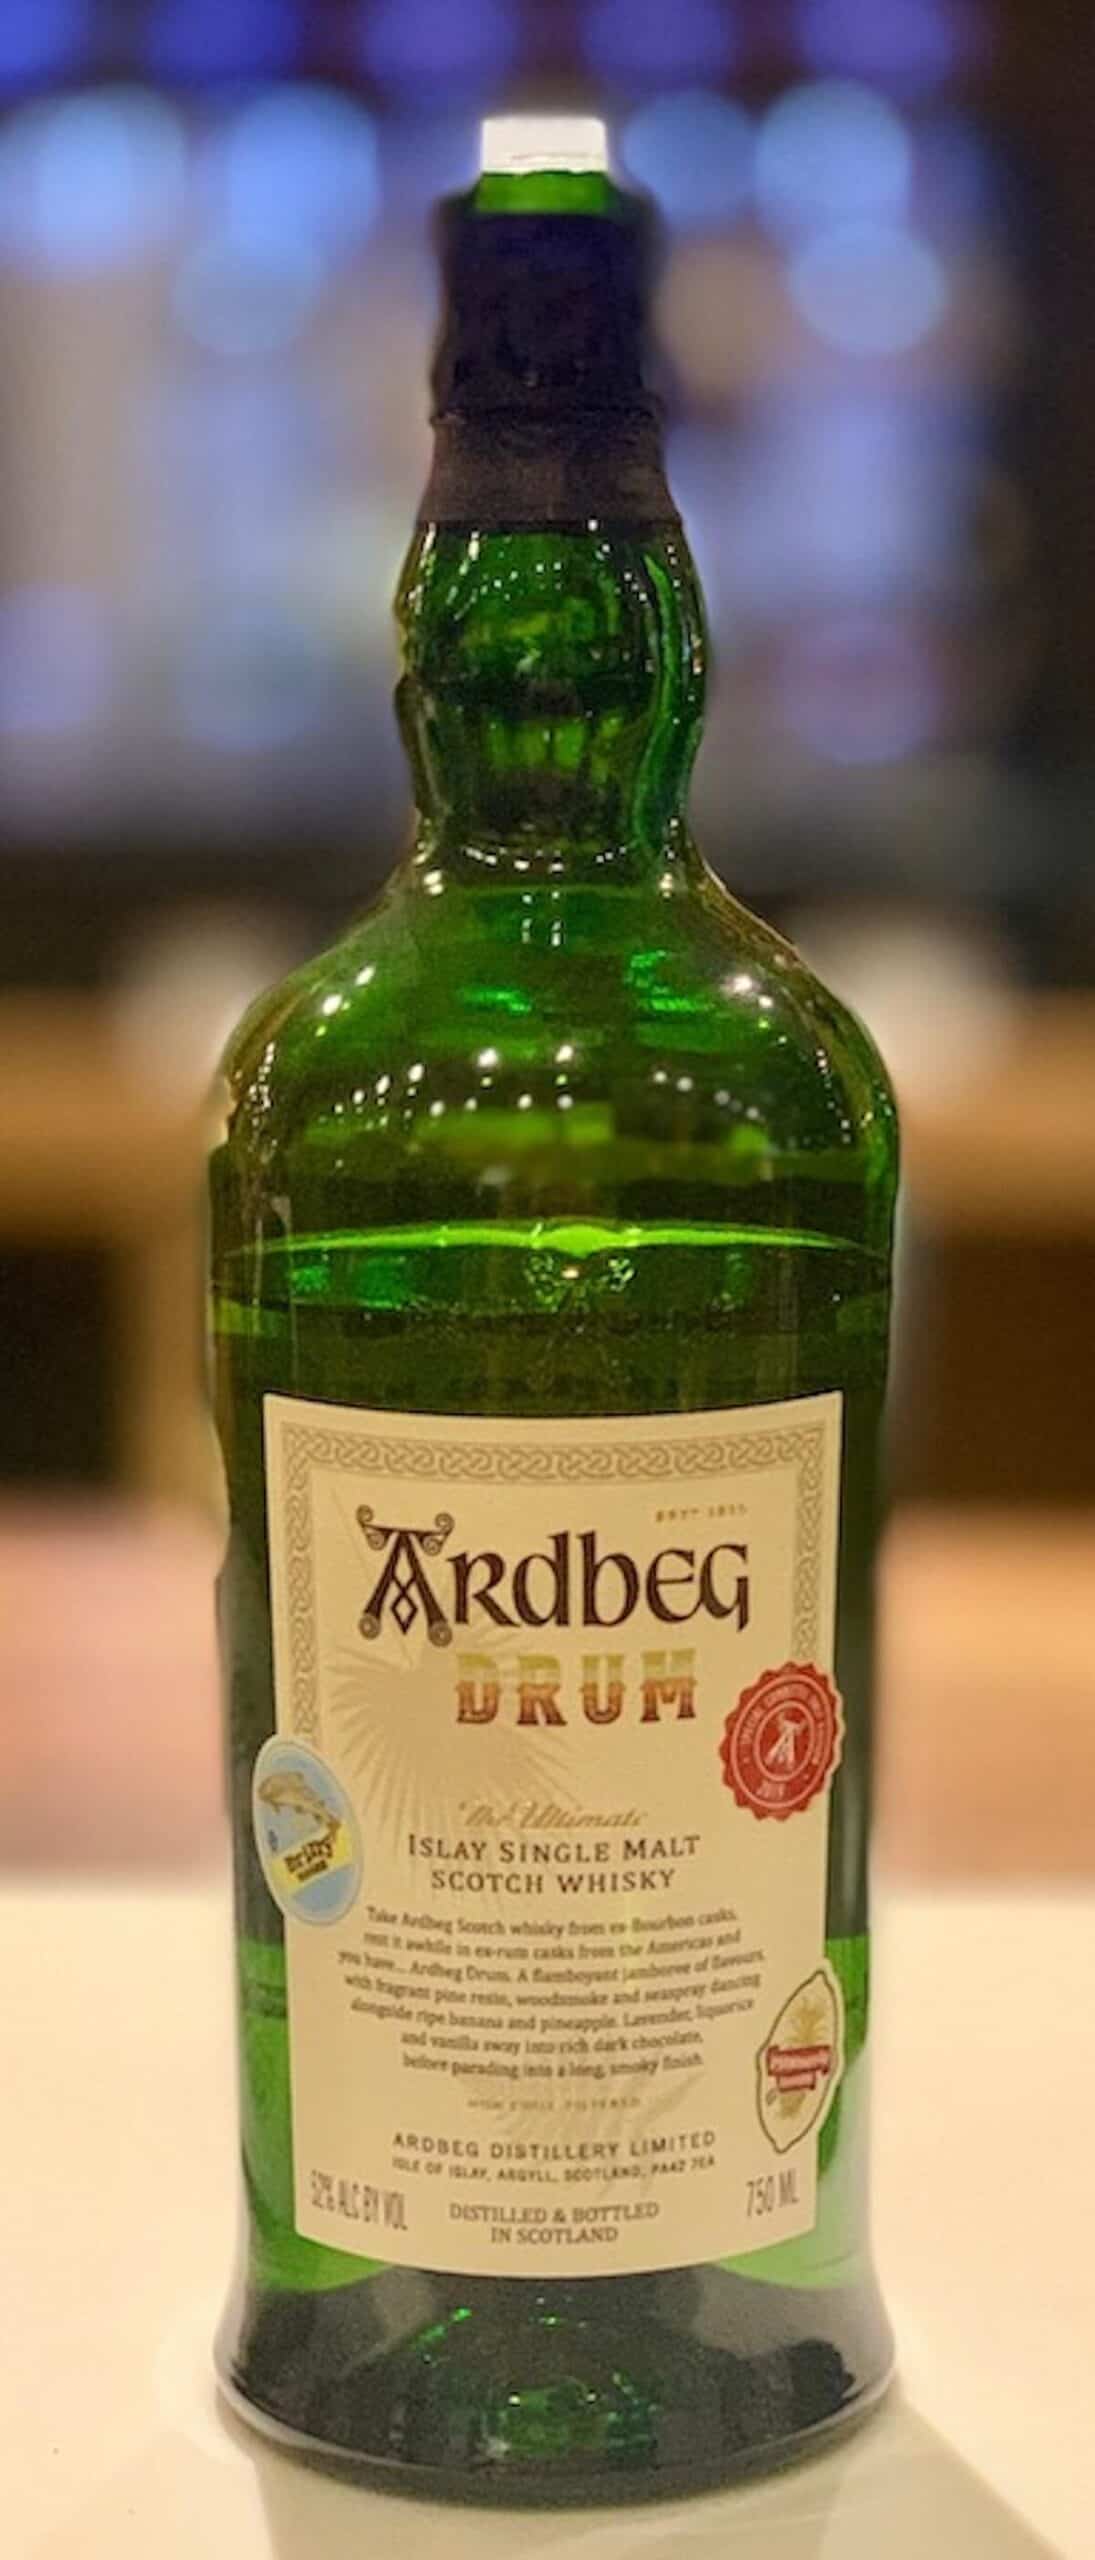 Ardbeg Drum in bottle on a counter.